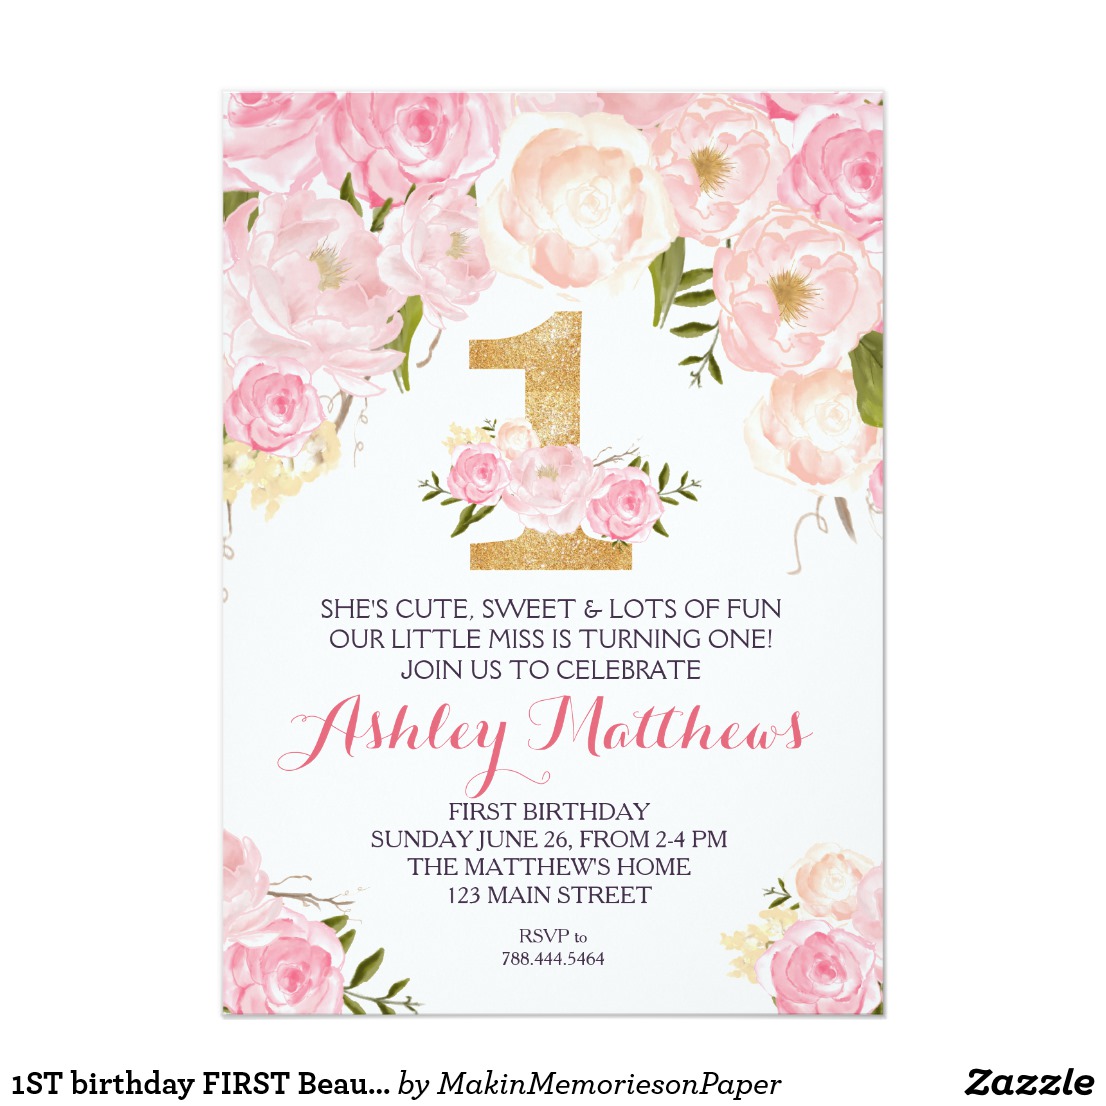 KIDS BIRTHDAY PARTY INVITATIONS - WOW! PARTY INVITATIONS